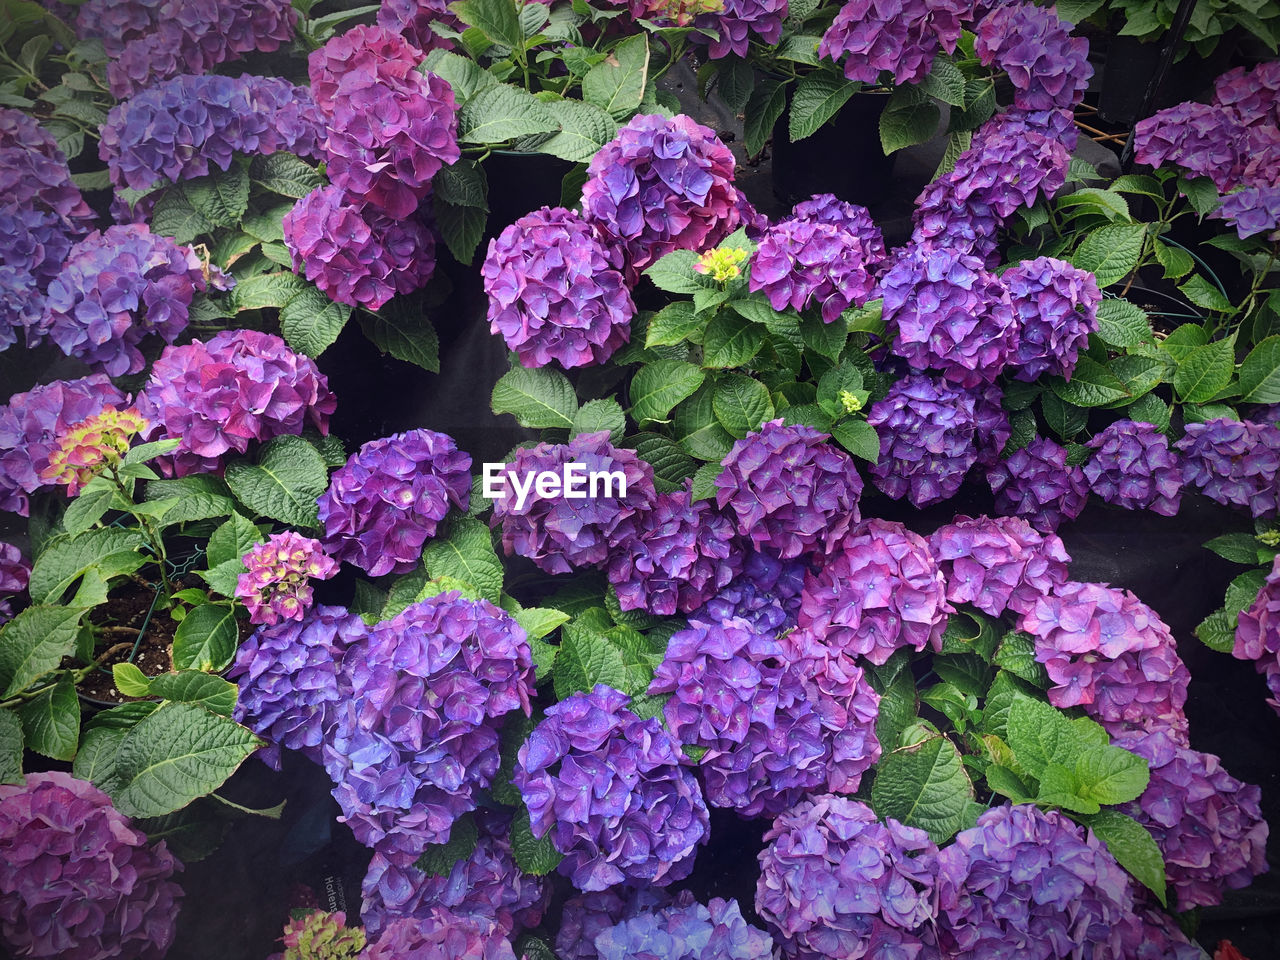 HIGH ANGLE VIEW OF PURPLE HYDRANGEA IN BLOOM